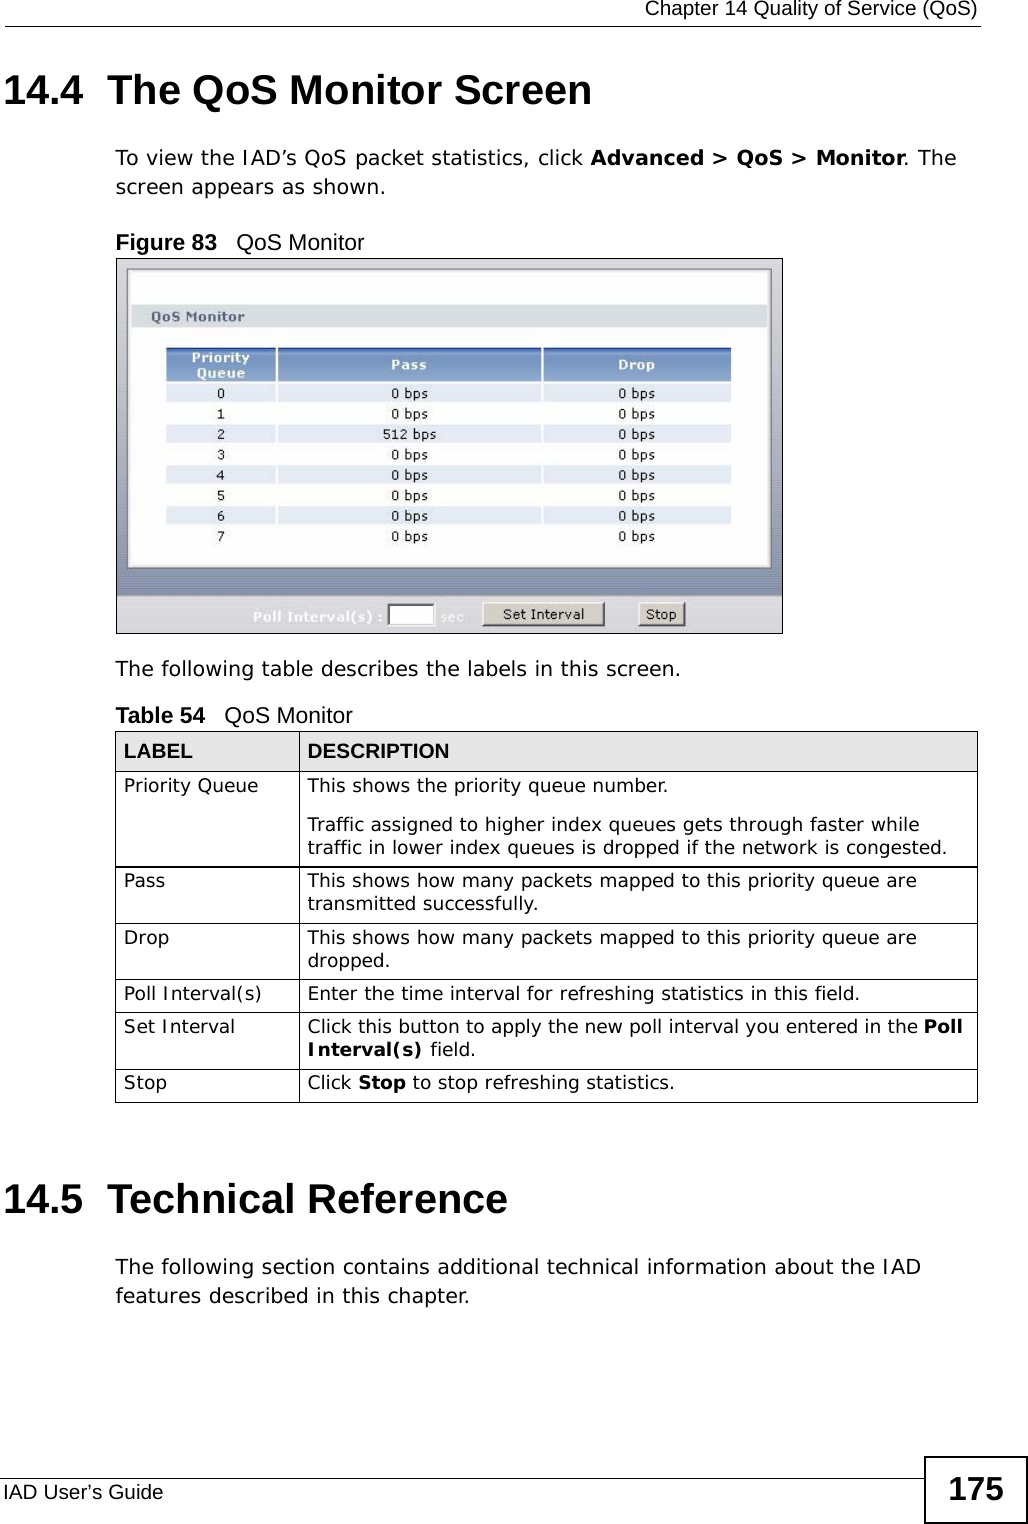  Chapter 14 Quality of Service (QoS)IAD User’s Guide 17514.4  The QoS Monitor Screen To view the IAD’s QoS packet statistics, click Advanced &gt; QoS &gt; Monitor. The screen appears as shown. Figure 83   QoS Monitor The following table describes the labels in this screen.  14.5  Technical ReferenceThe following section contains additional technical information about the IAD features described in this chapter.Table 54   QoS MonitorLABEL DESCRIPTIONPriority Queue This shows the priority queue number. Traffic assigned to higher index queues gets through faster while traffic in lower index queues is dropped if the network is congested.Pass This shows how many packets mapped to this priority queue are transmitted successfully.Drop This shows how many packets mapped to this priority queue are dropped.Poll Interval(s) Enter the time interval for refreshing statistics in this field.Set Interval Click this button to apply the new poll interval you entered in the Poll Interval(s) field.Stop Click Stop to stop refreshing statistics.